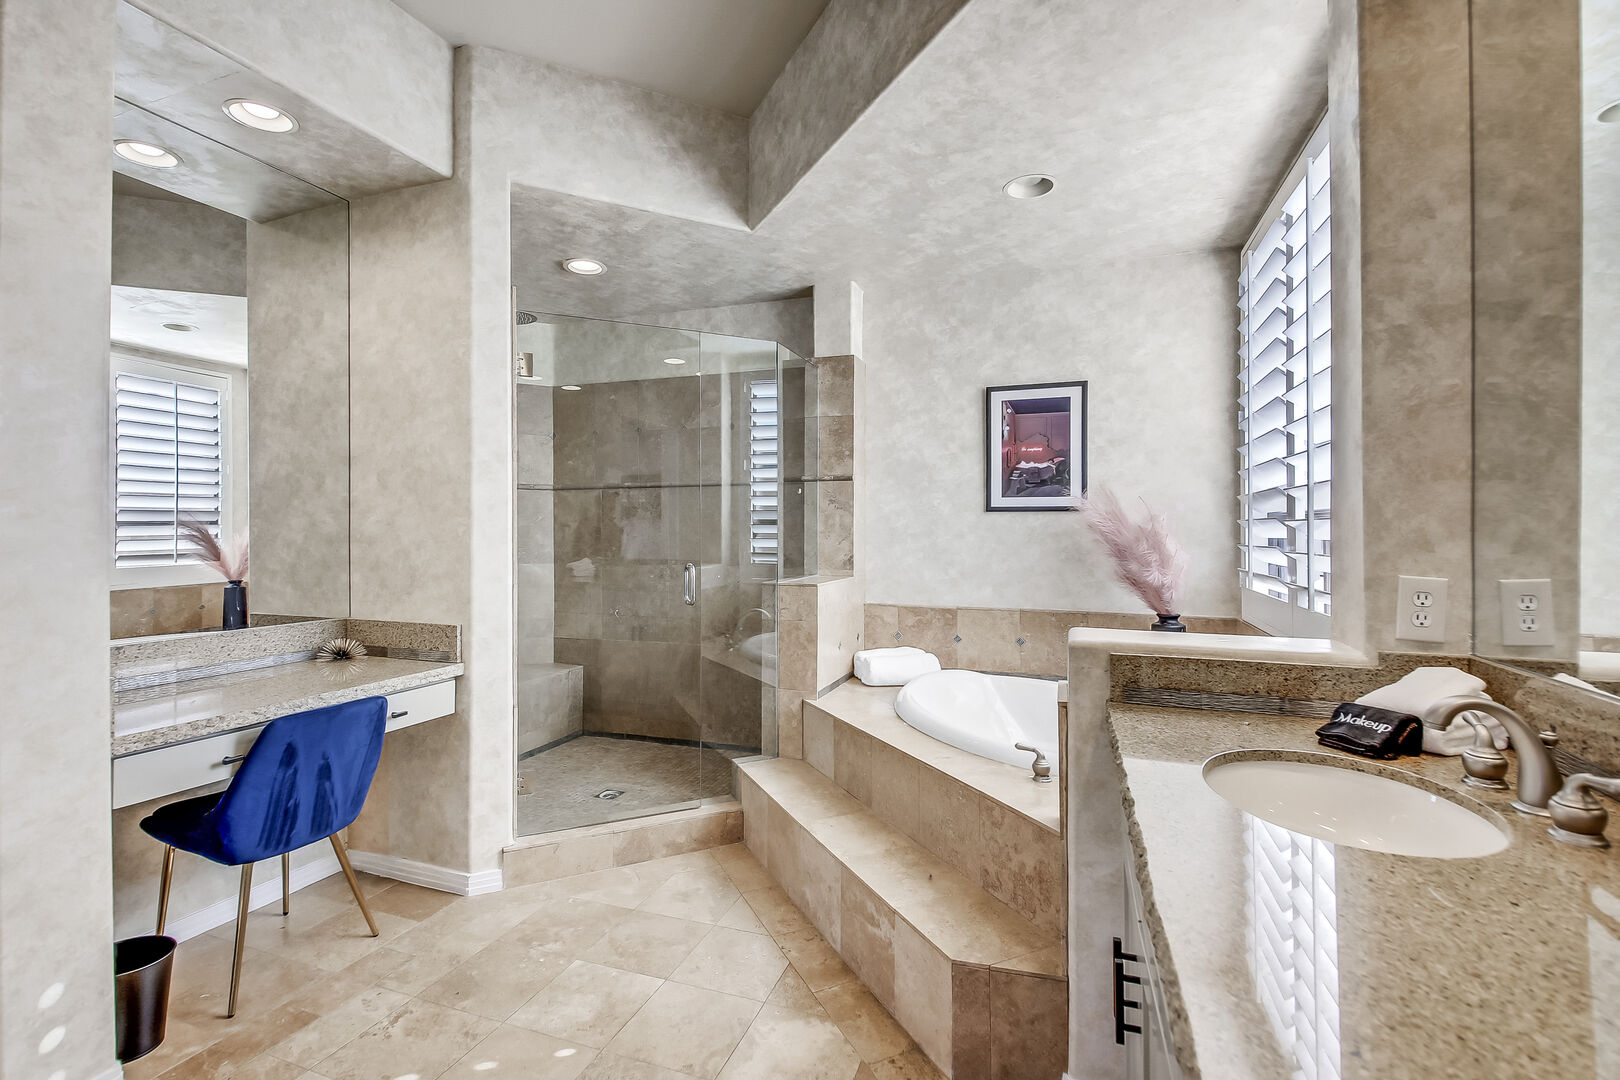 Master Suite 1 features double vanity sinks and a makeup counter.